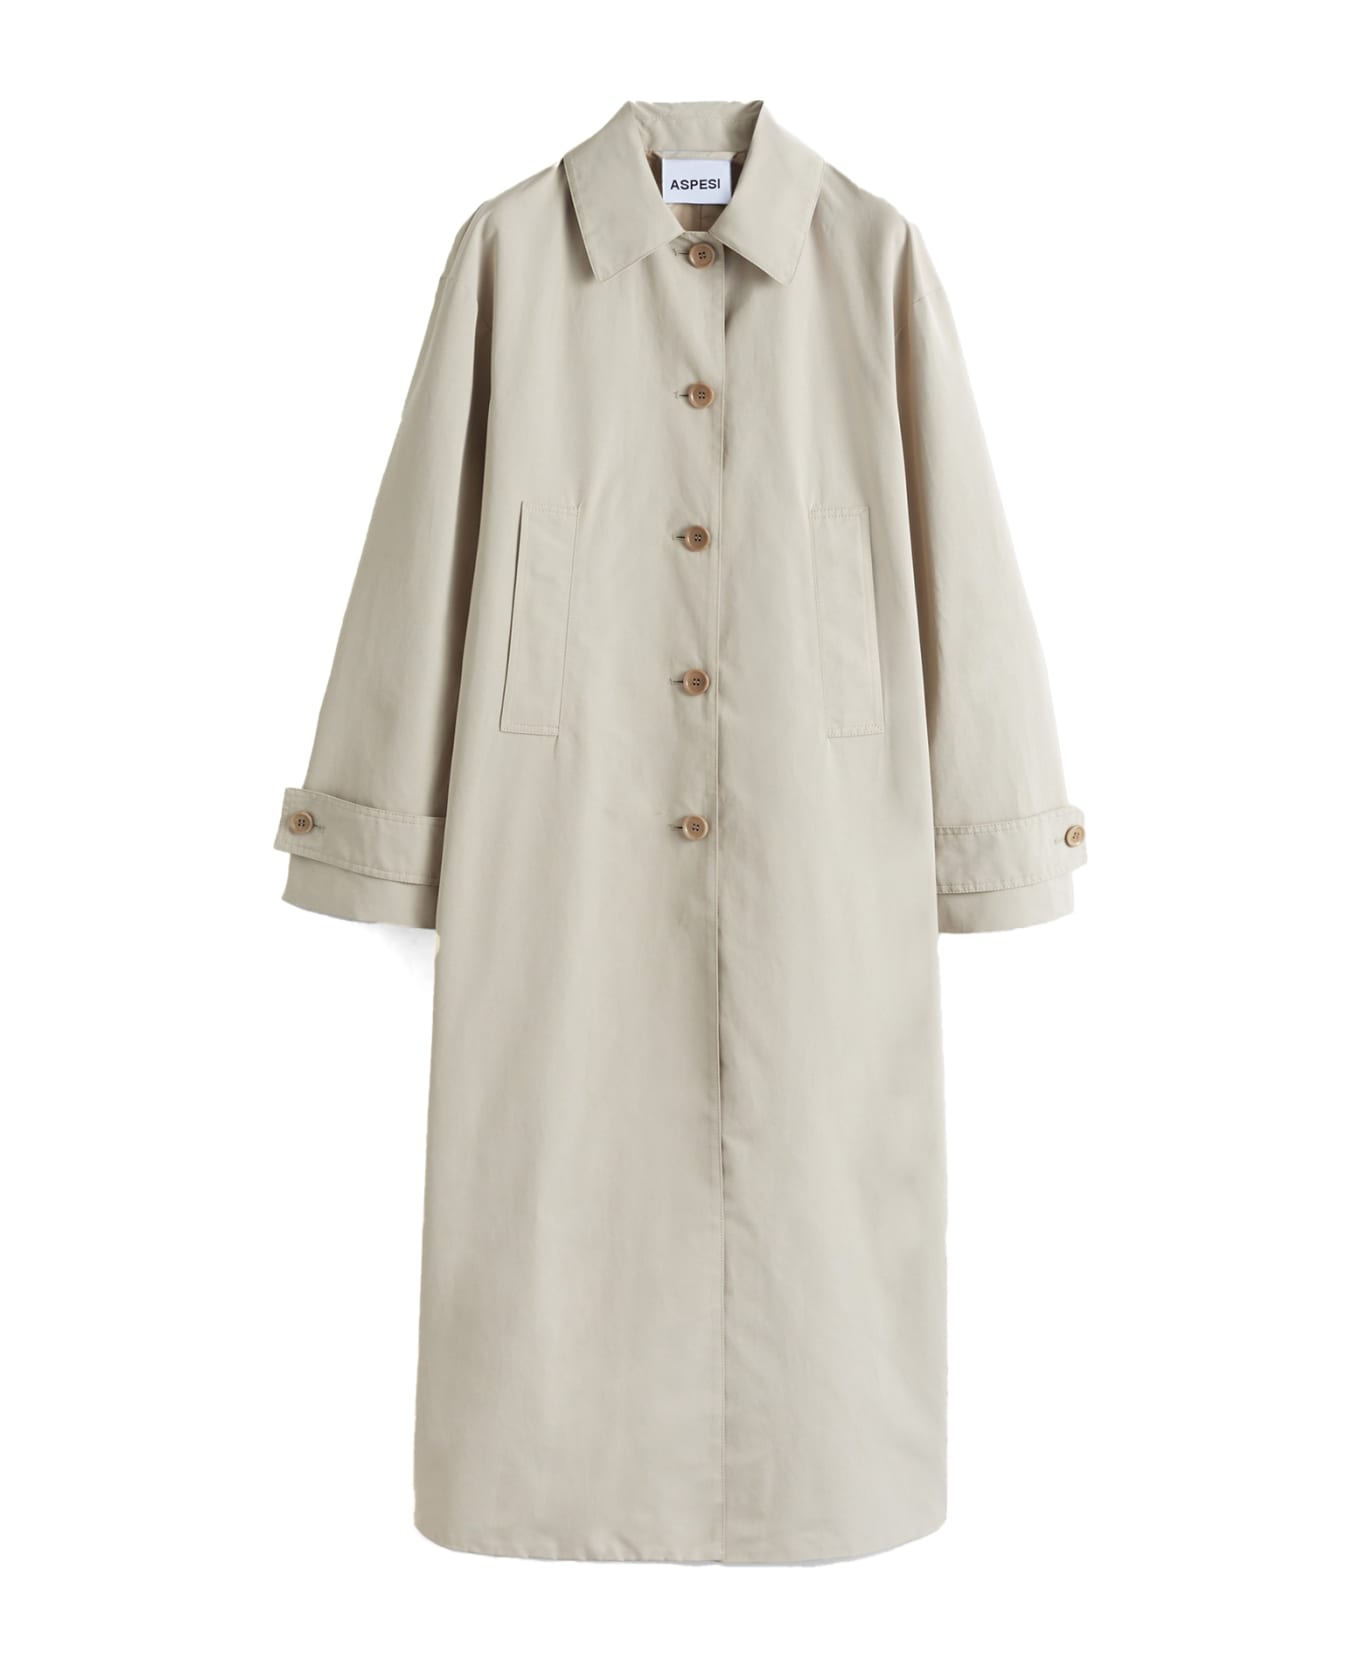 Aspesi Long Beige Trench Coat With Buttons - SABBIA レインコート